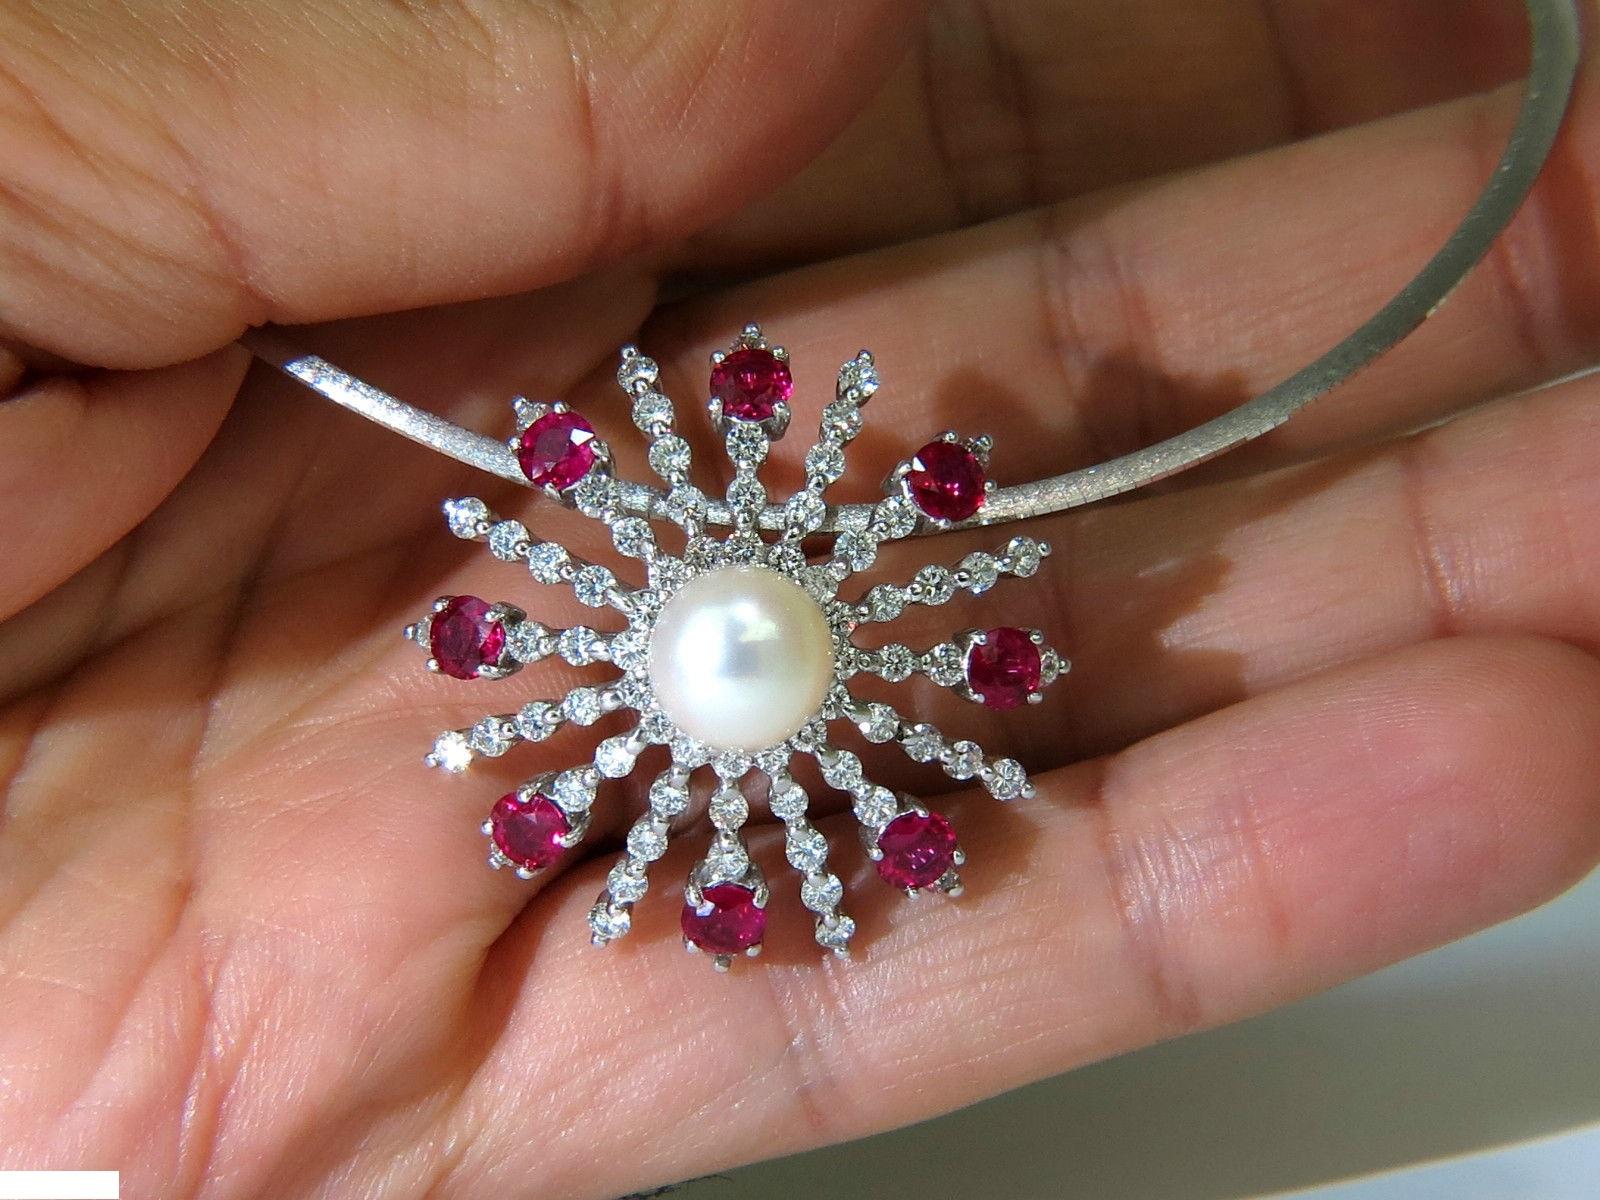 Star Burst 3d Pendant and necklace



9.50mm Cultured Pearl

Excellent luster

No pits nicks or dents.

3.00ct. Natural Red Rubies 

Very Clean clarity

excellent transparency

Classic Pigeon Blood colors

Fully faceted and rounds.



 2.75ct.